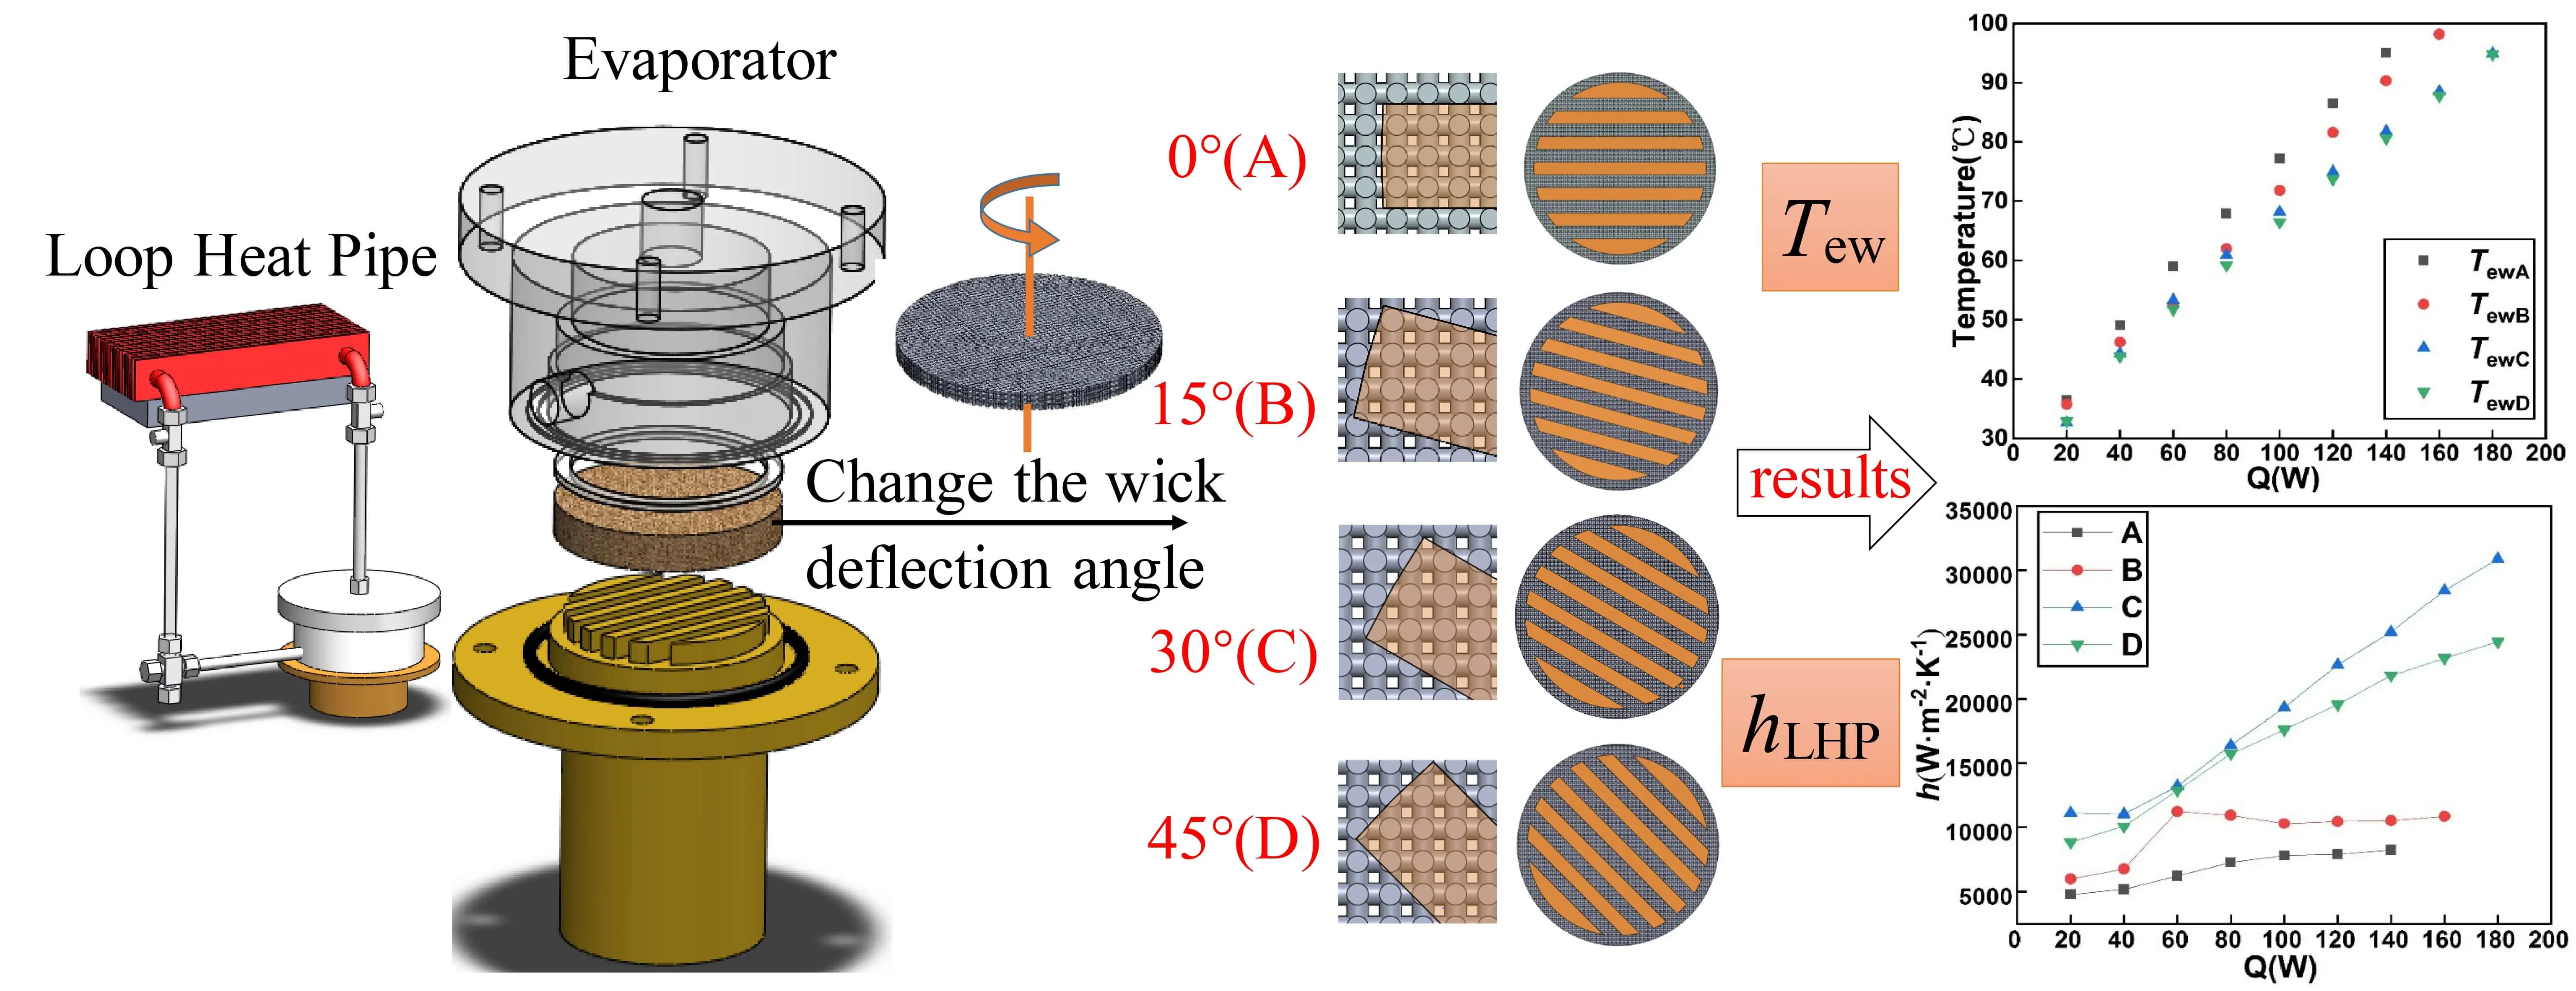 Effect of the Wick Deflection Angles on Heat Transfer Characteristics for the Flat LHP